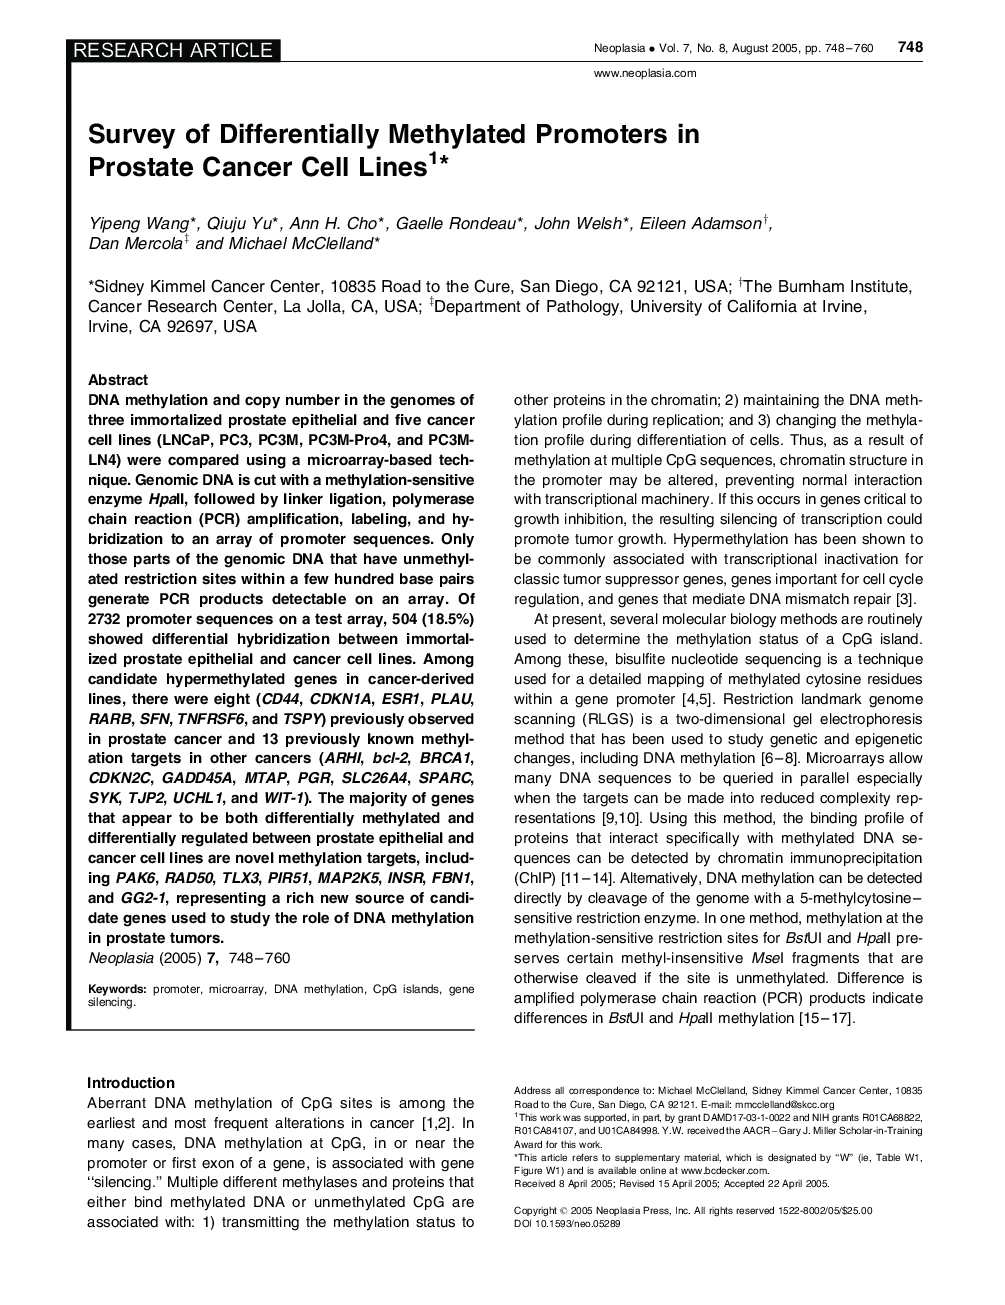 Survey of Differentially Methylated Promoters in Prostate Cancer Cell Lines